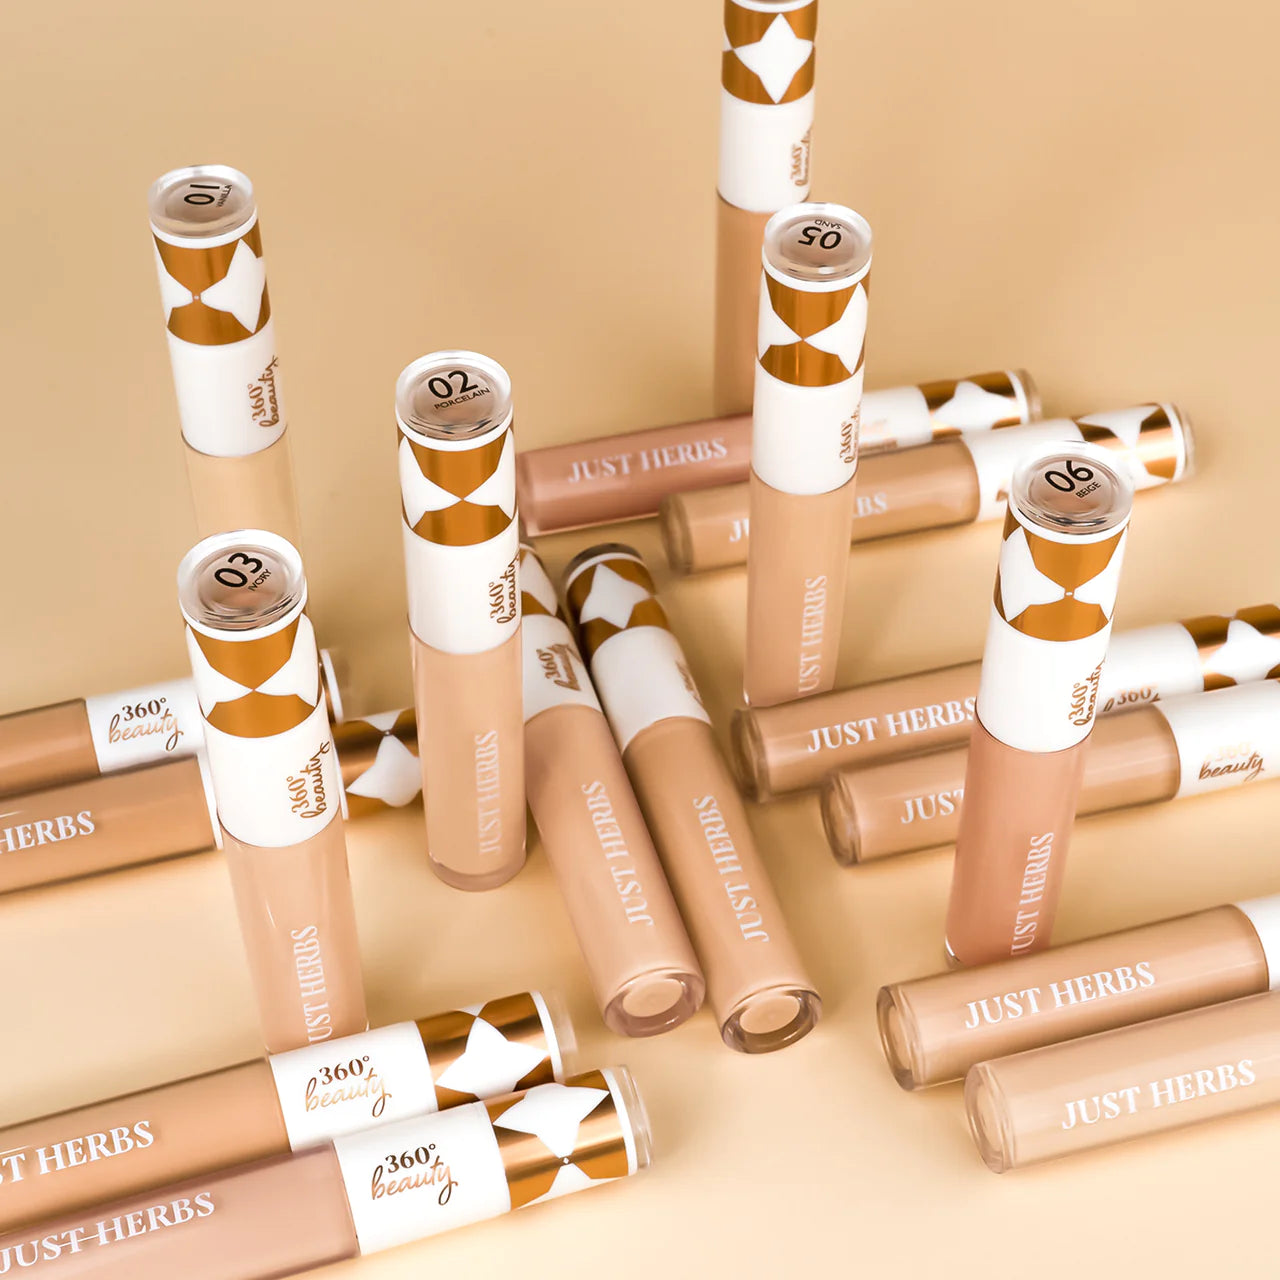 Just Herbs Concealer Brightening & Correcting - Mango Butter and Liquorice Root